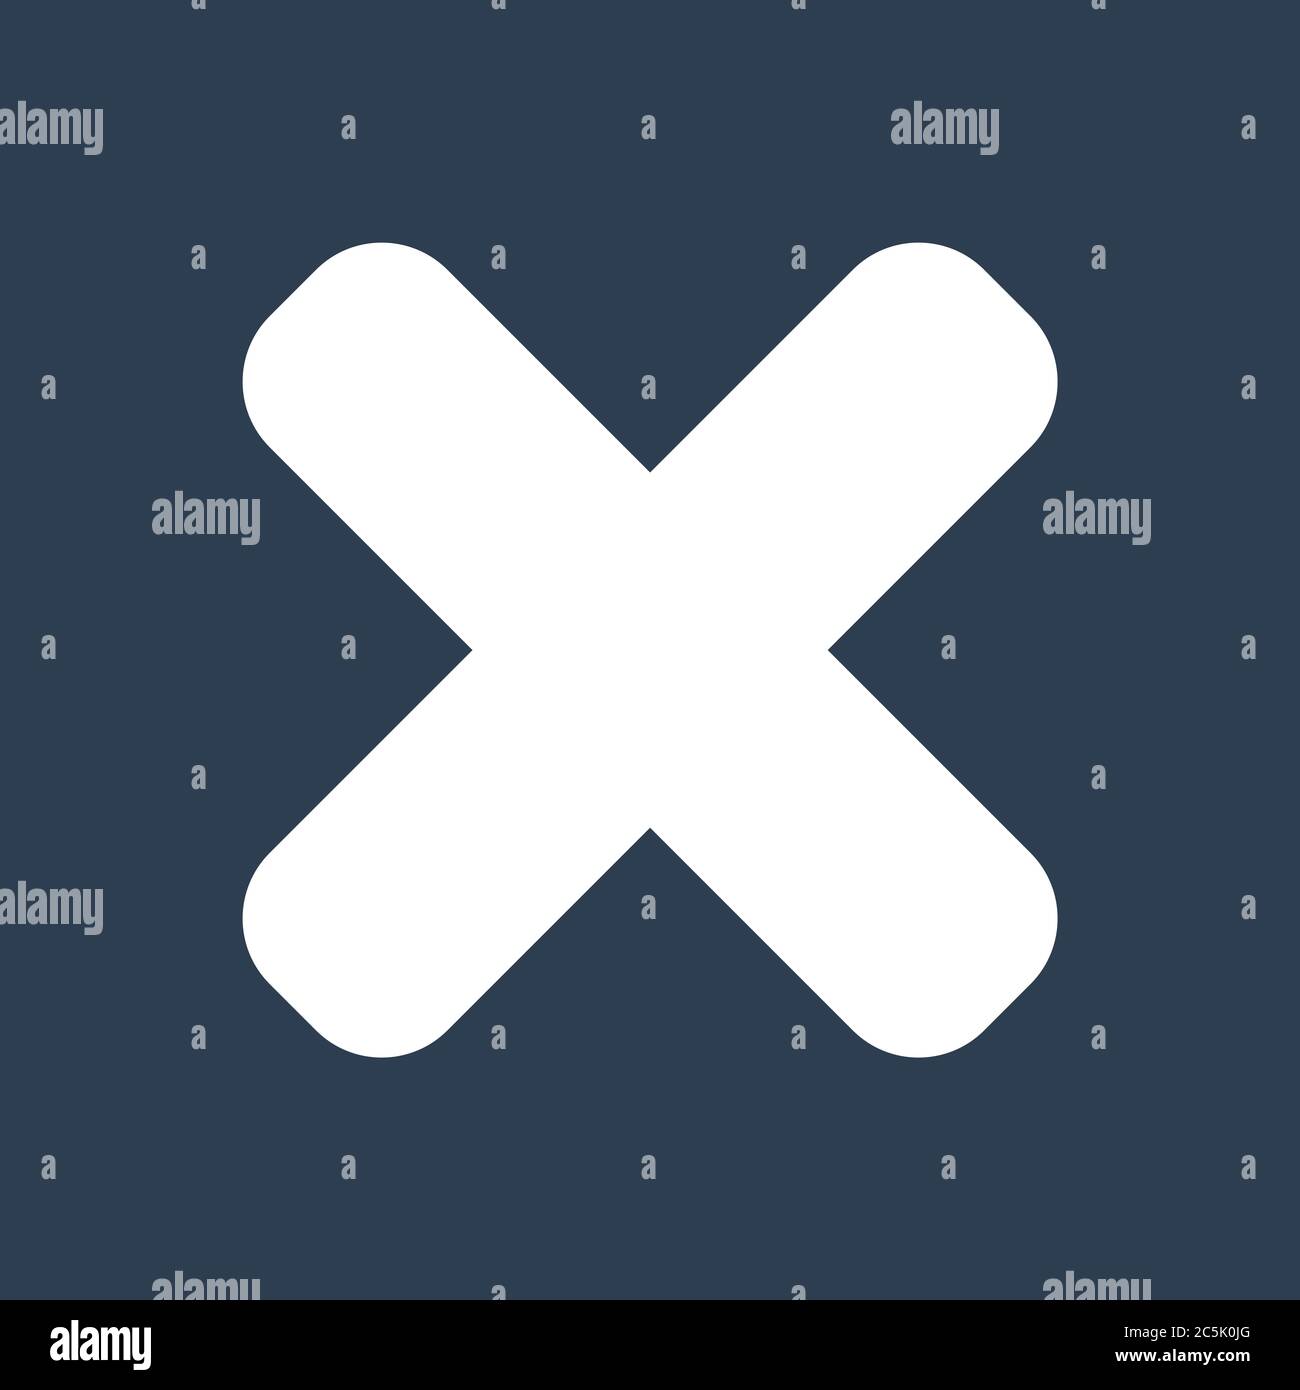 Multiplication sign icon. For websites and apps. Image on black background. Flat line vector illustration. Stock Vector